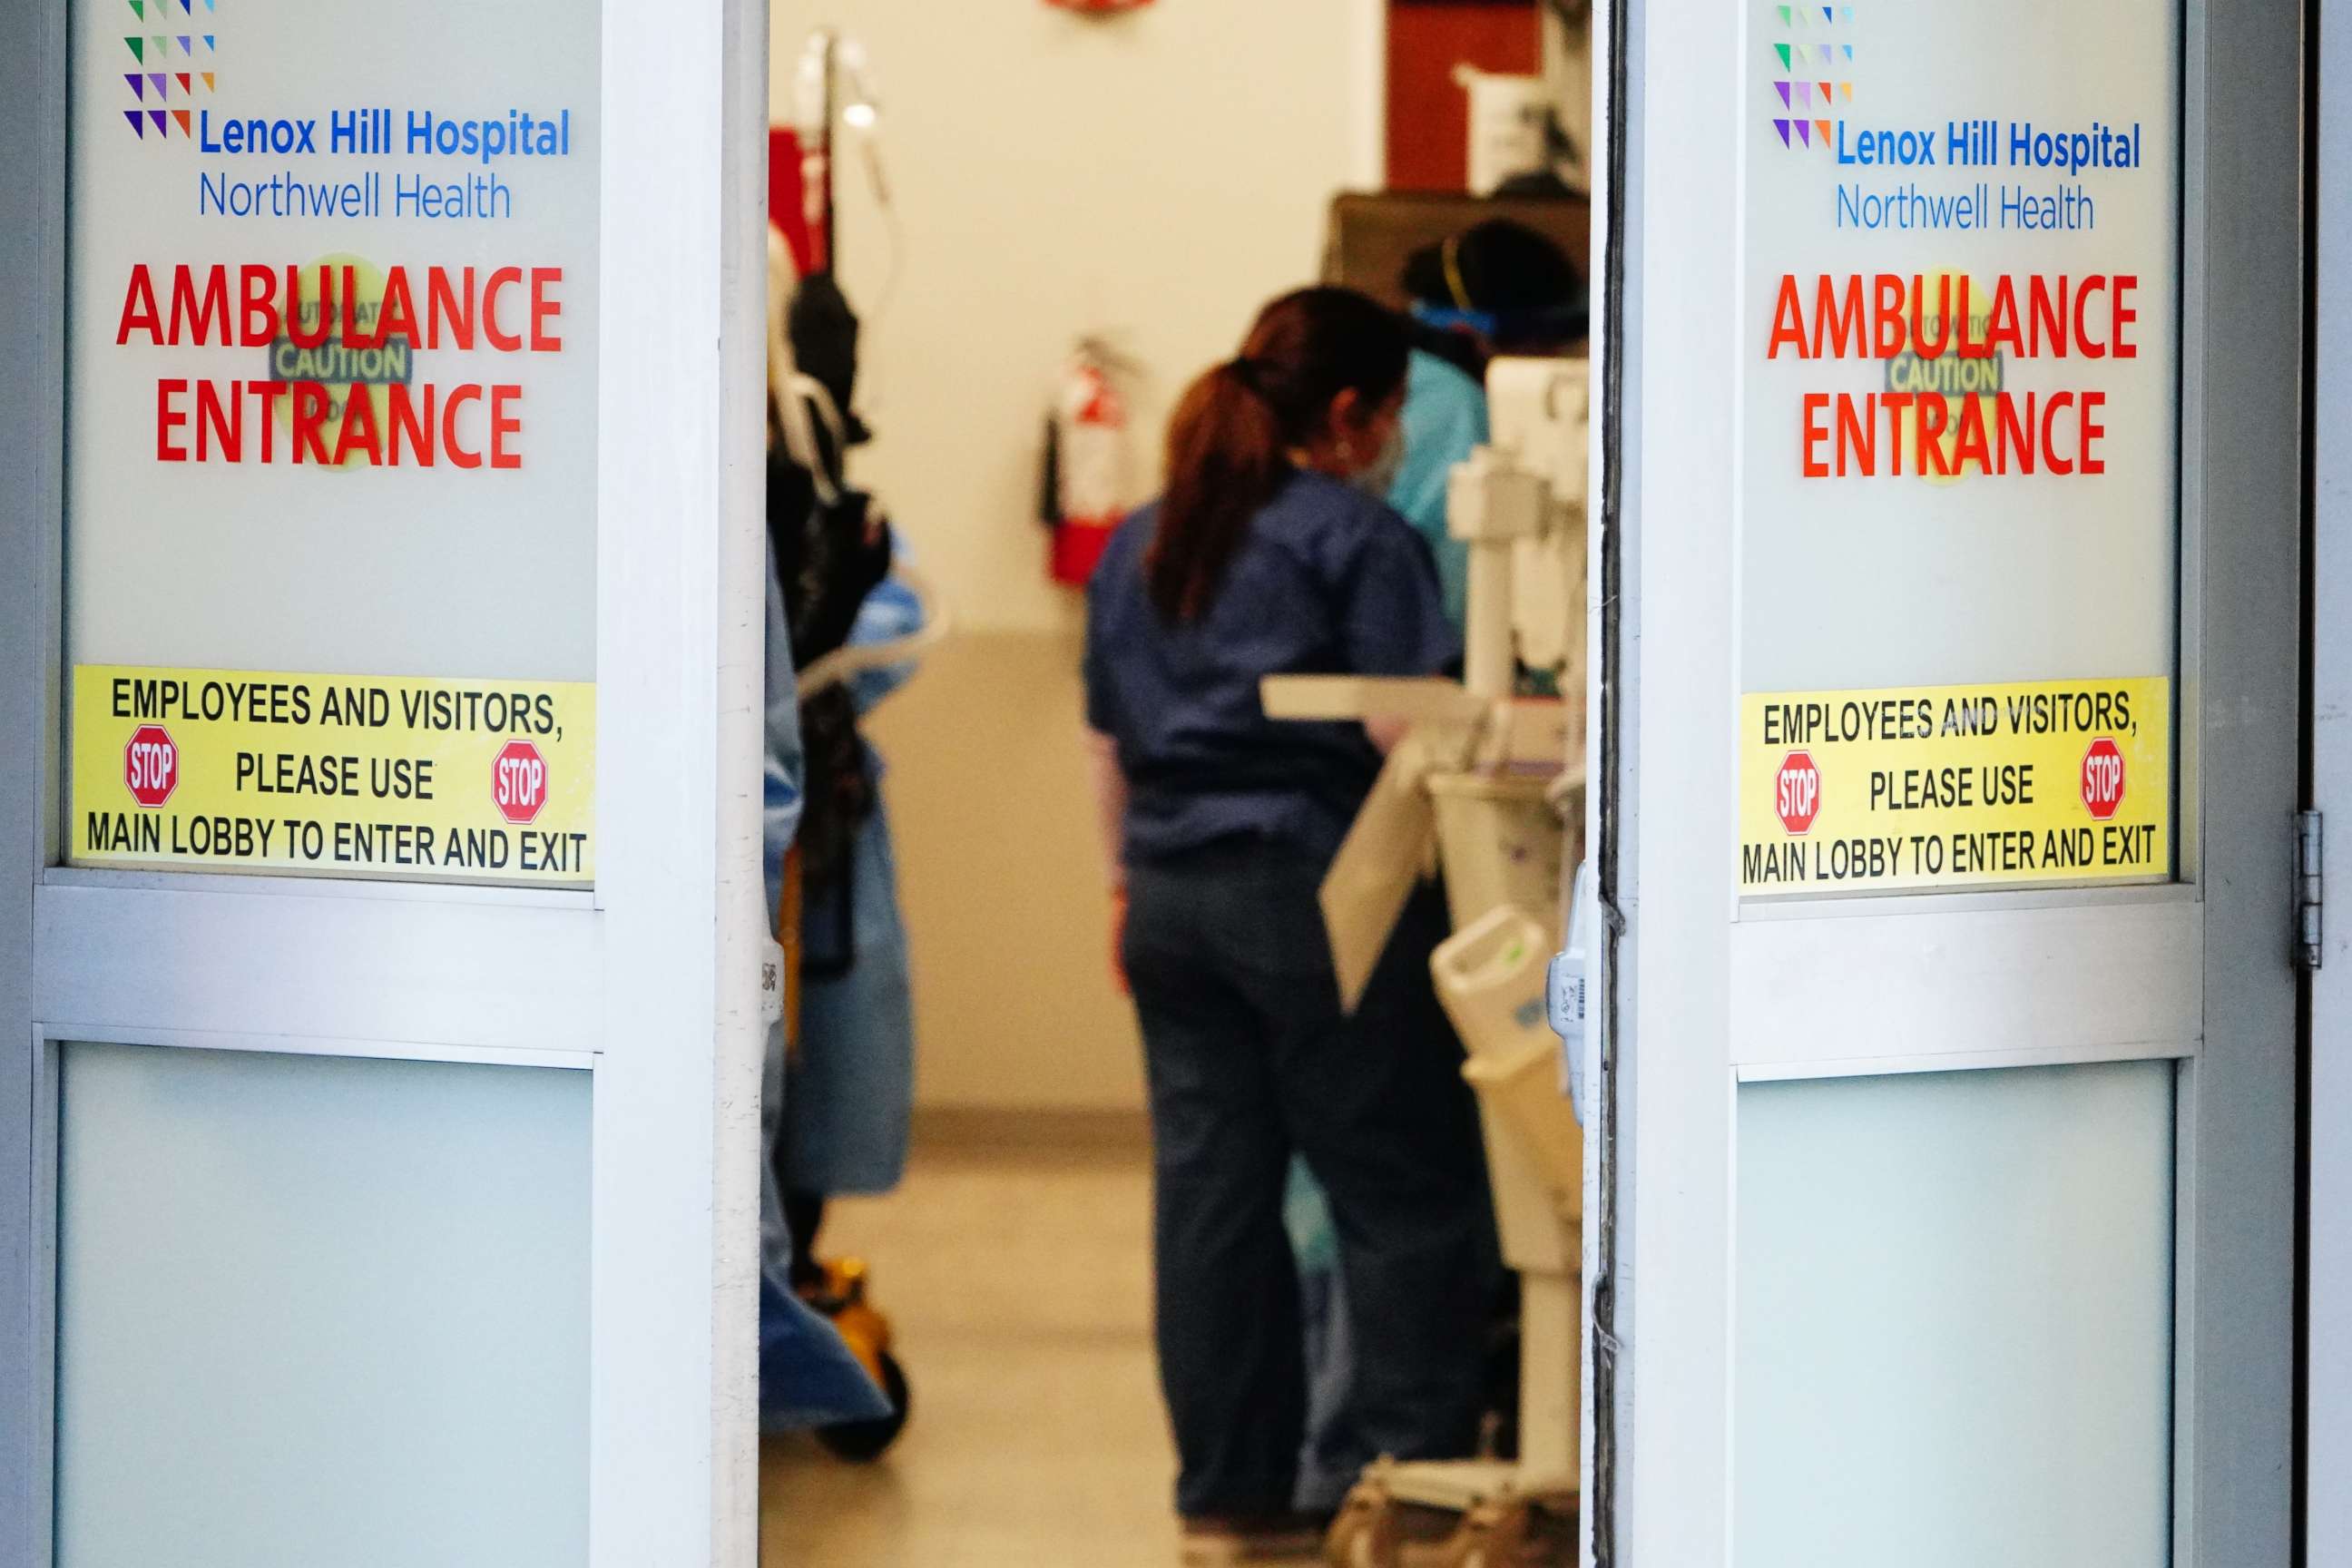 PHOTO: Medical workers are pictured inside a triage area at Lenox Hill Hospital in New York during the coronavirus pandemic, April 7, 2020.